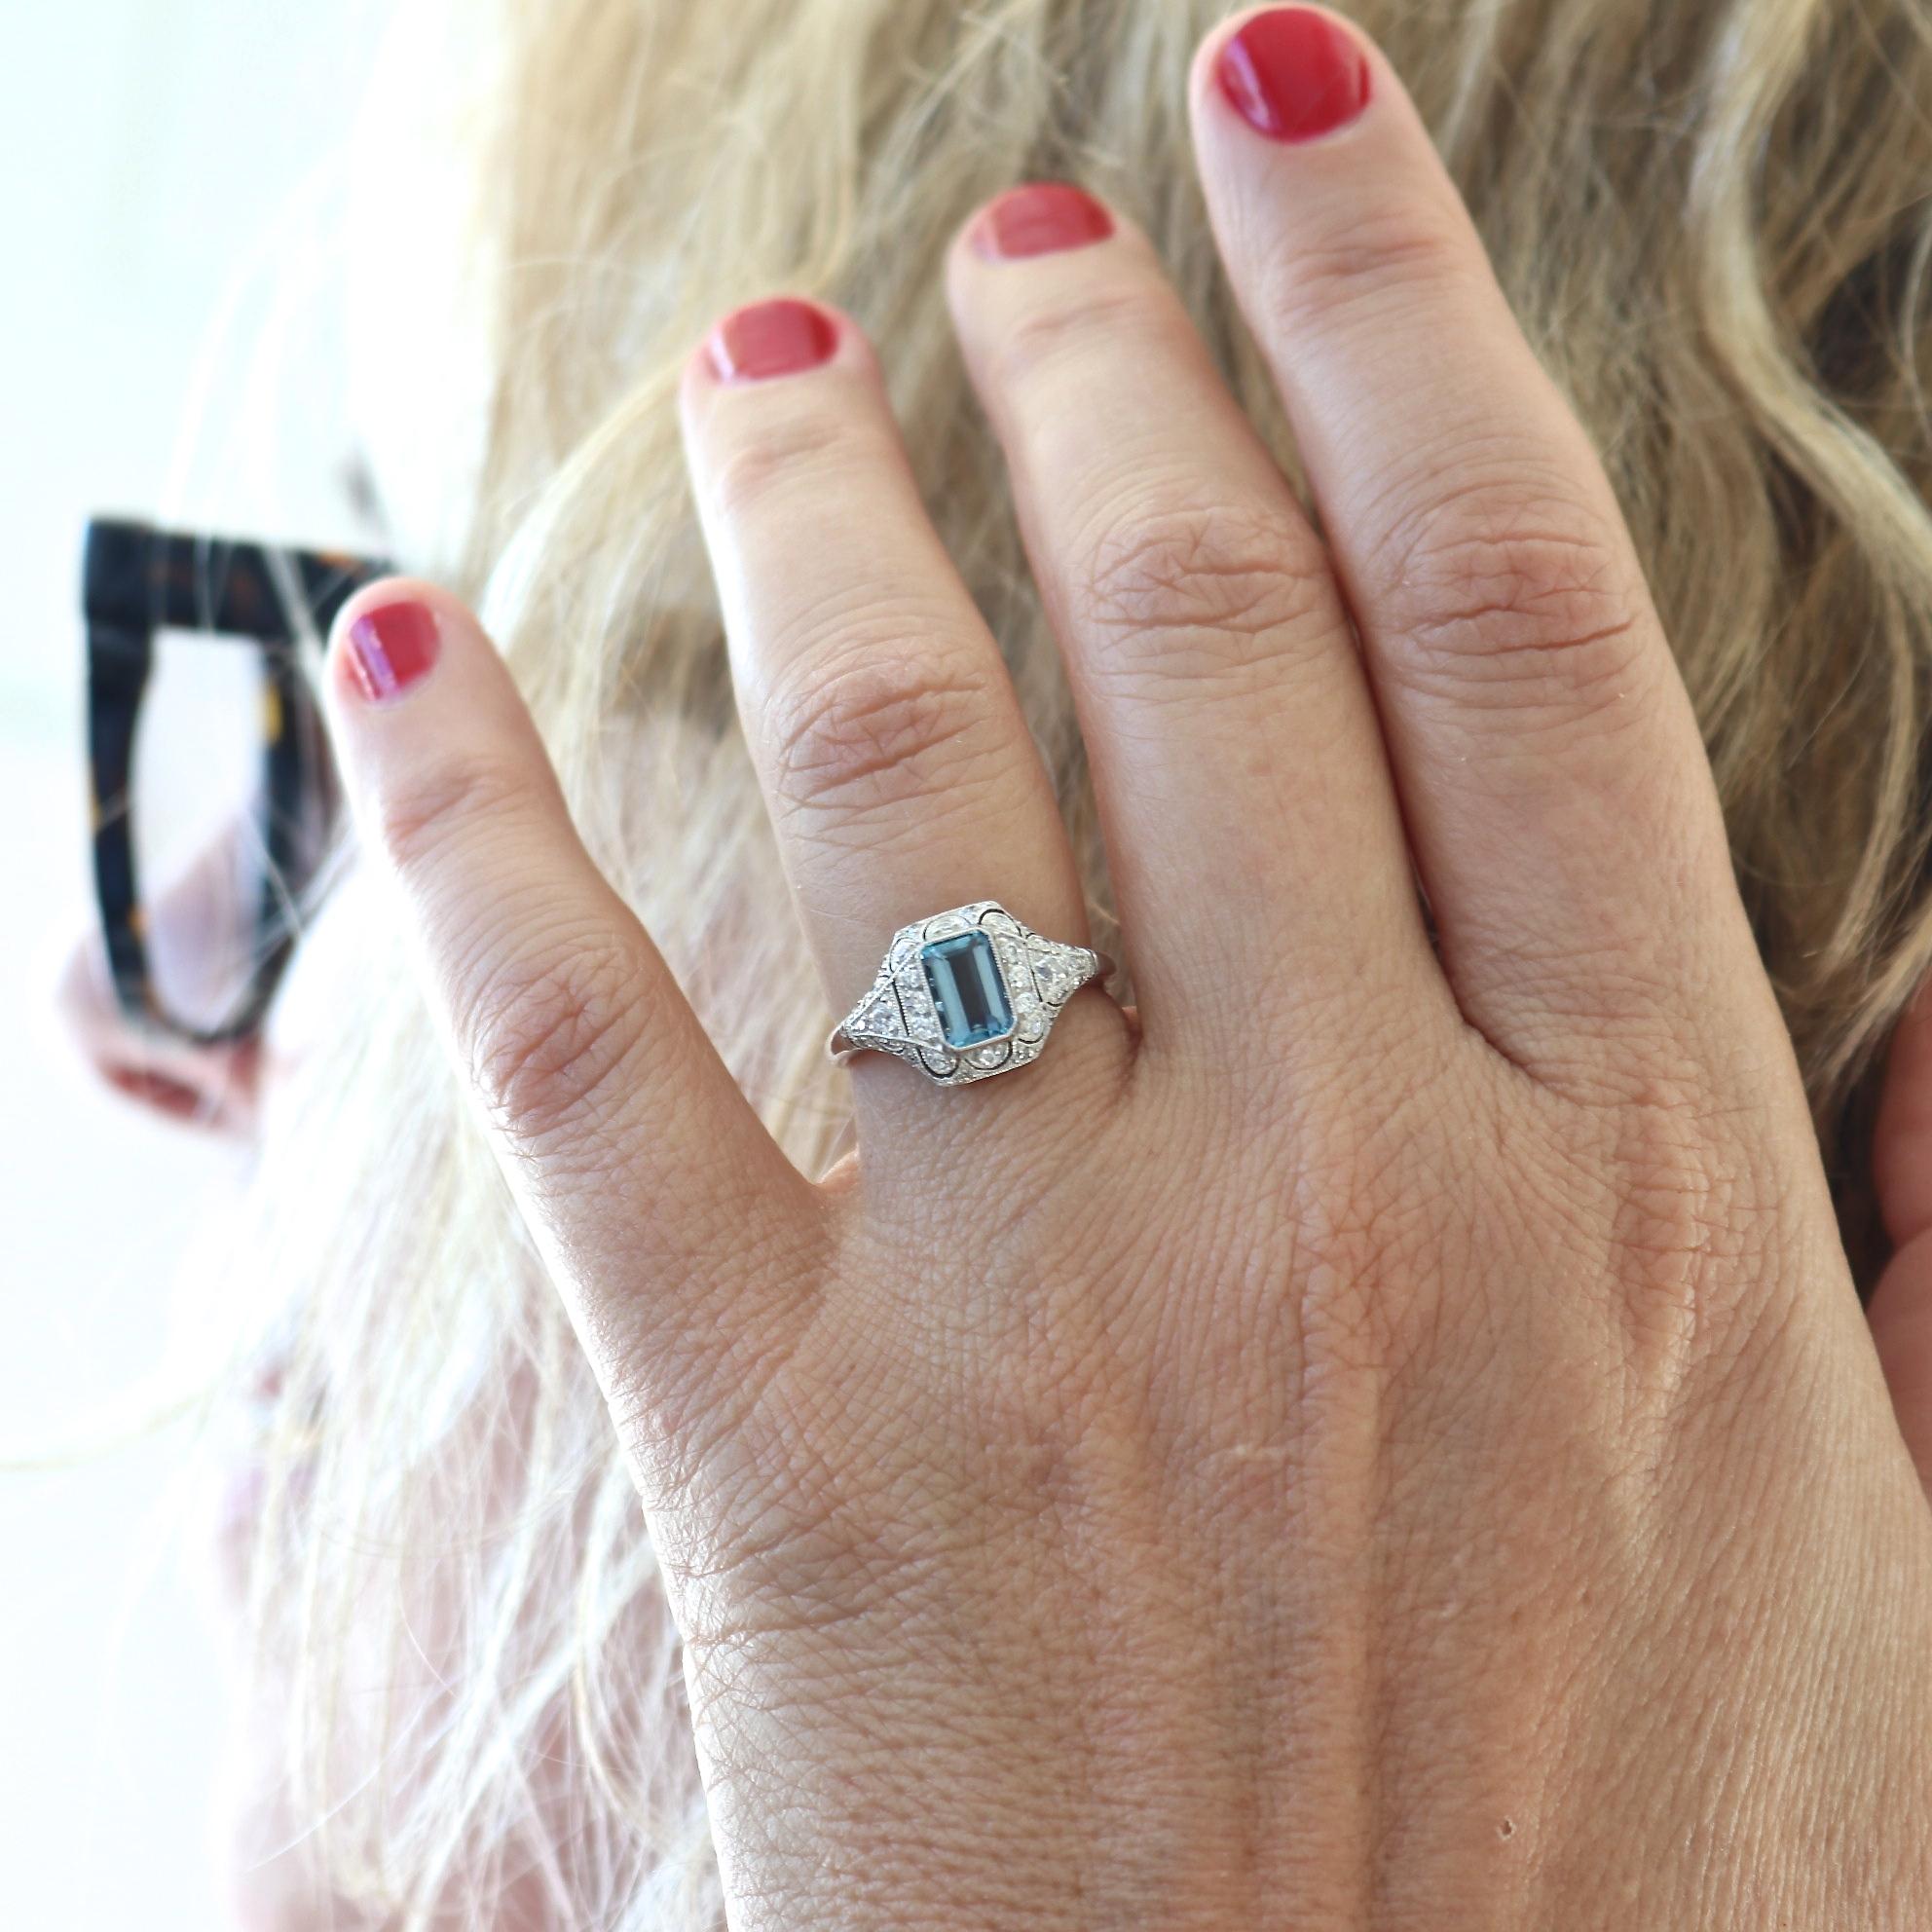 Intricacy made in loving fashion. Featuring a lively emerald cut aquamarine wrapped in sparkling white diamonds and delicately crafted platinum. Ring size 6-1/2 and can easily be resized to fit, if needed this would come complimentary with your